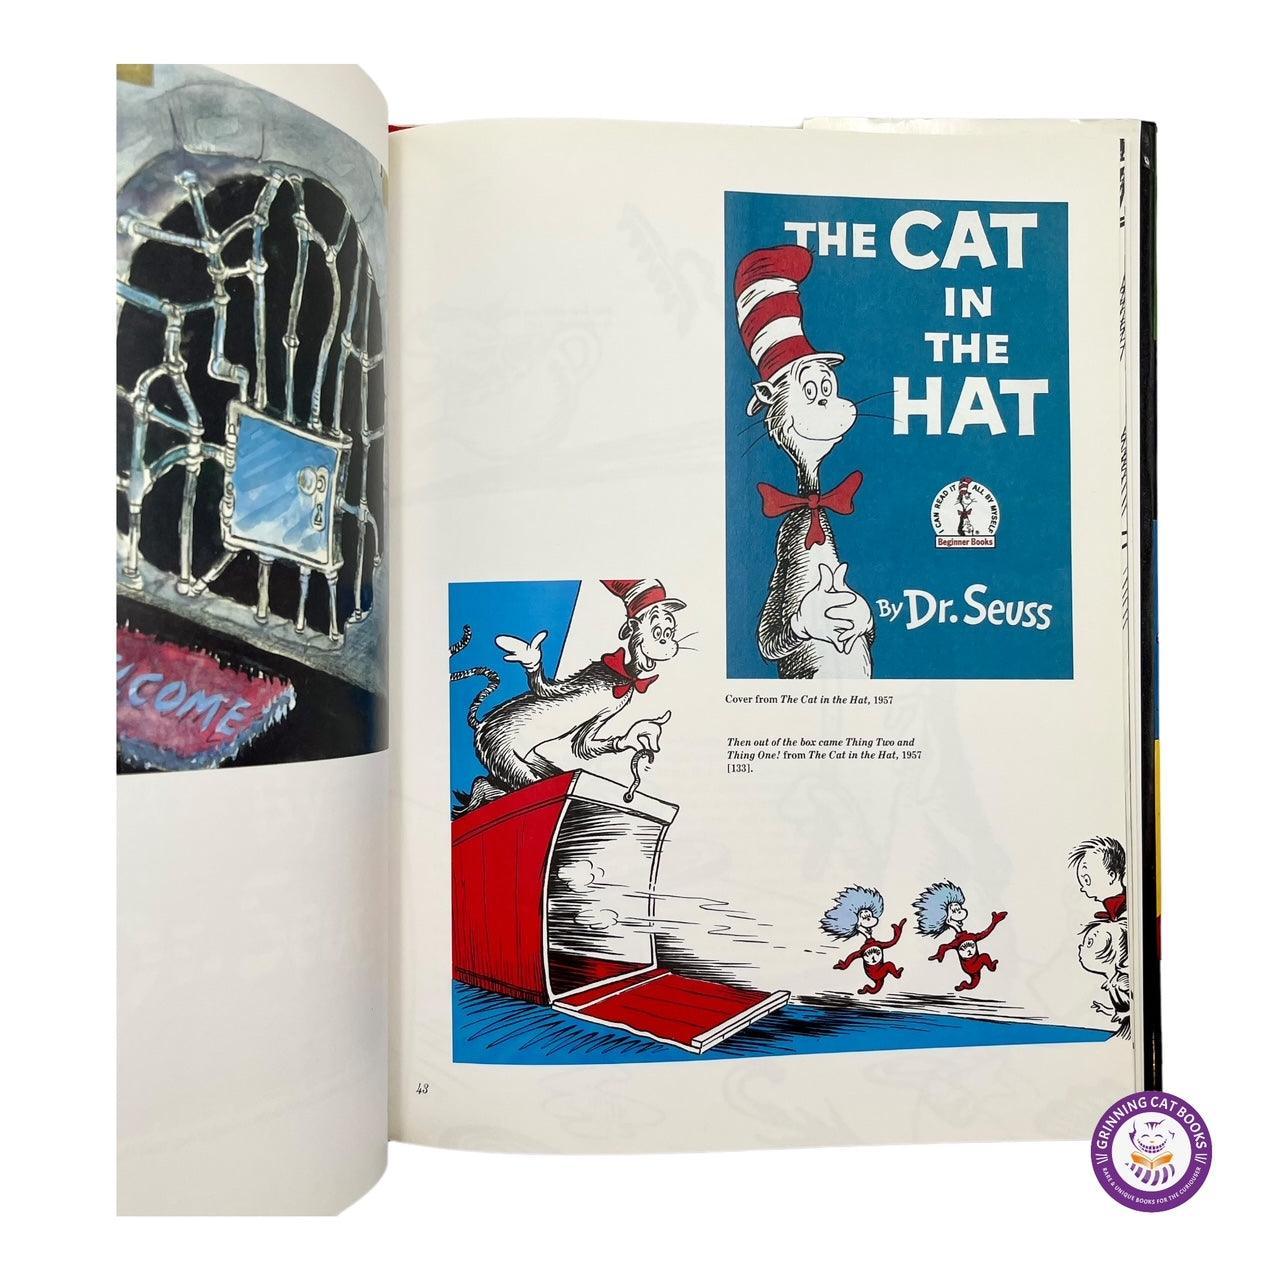 Dr. Seuss From Then to Now - Grinning Cat Books - Books - SEUSS